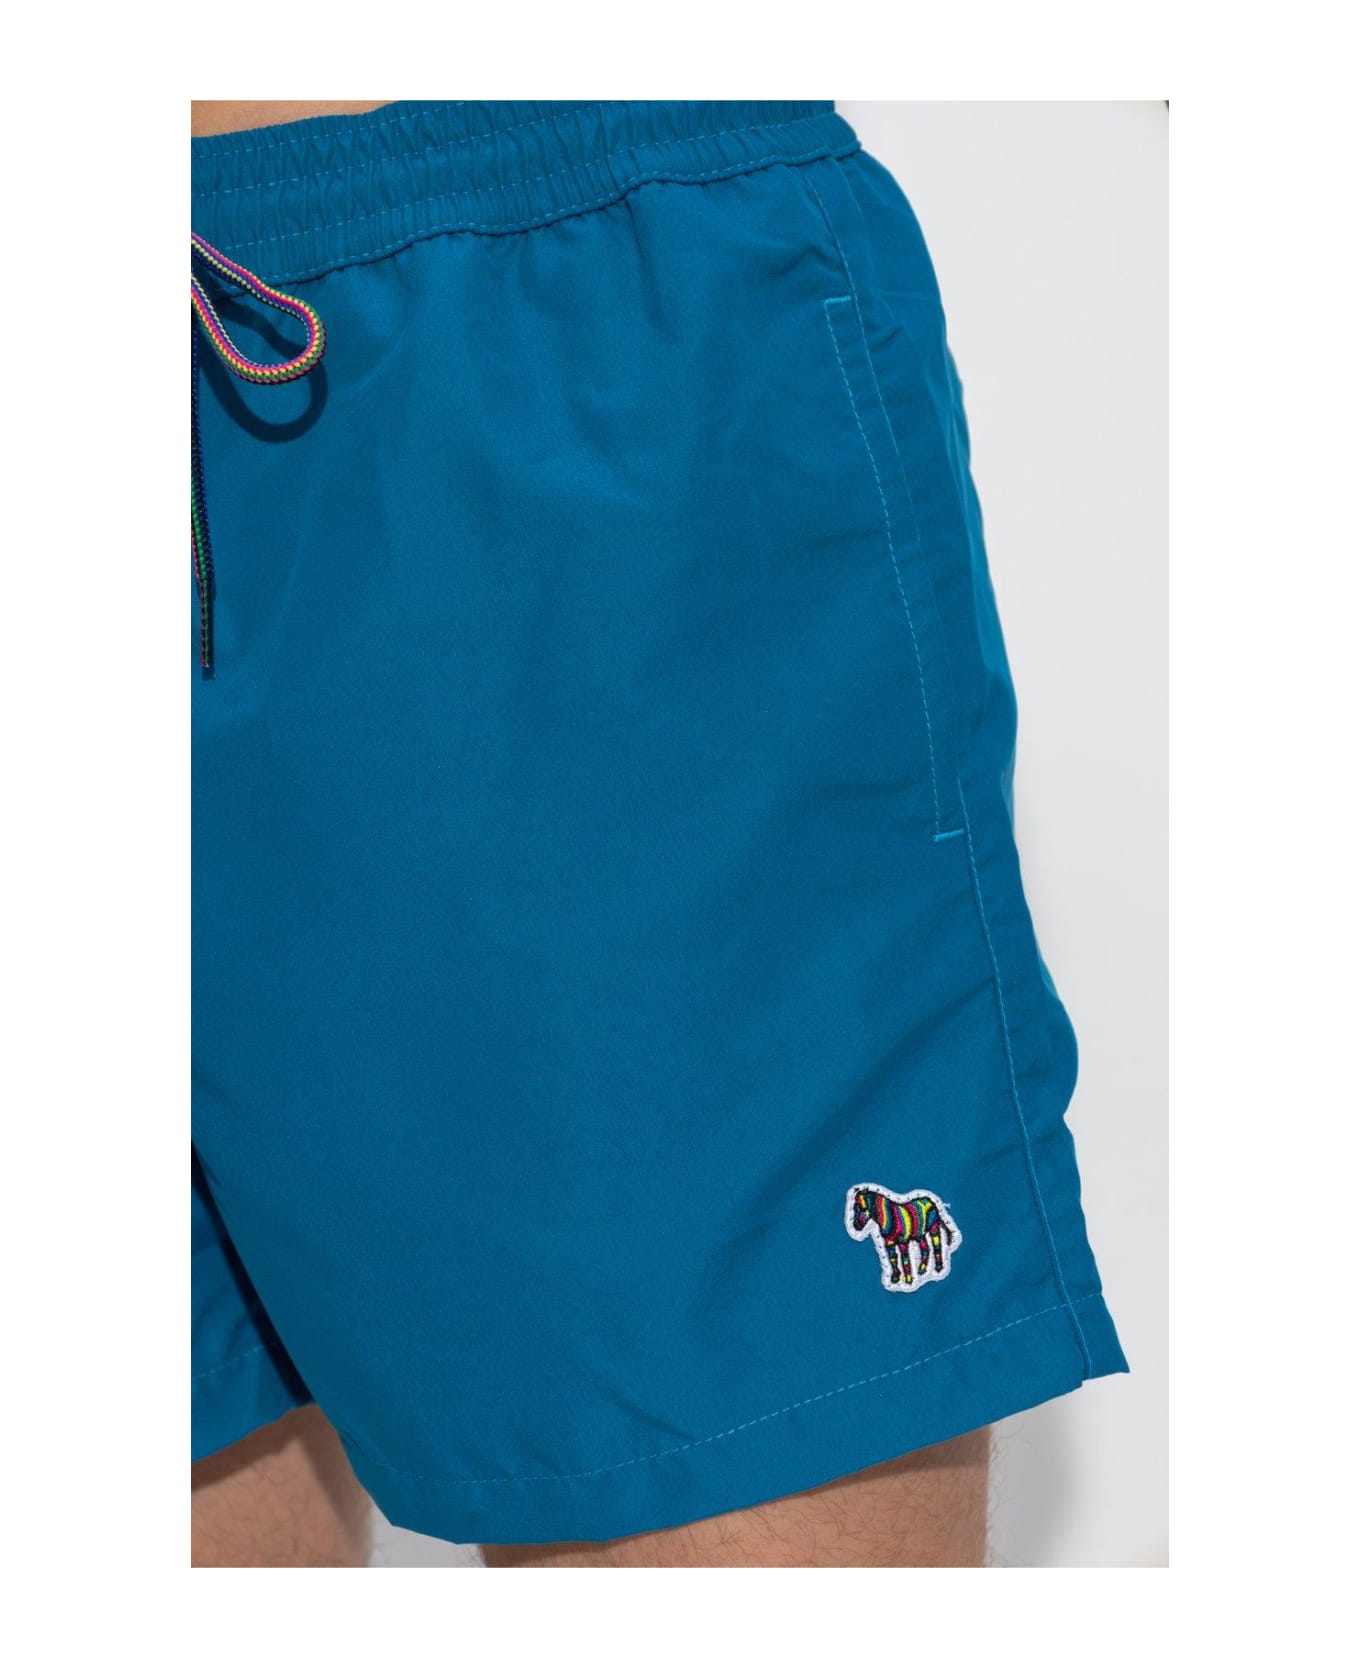 Paul Smith Swimming Shorts With Patch - Blue